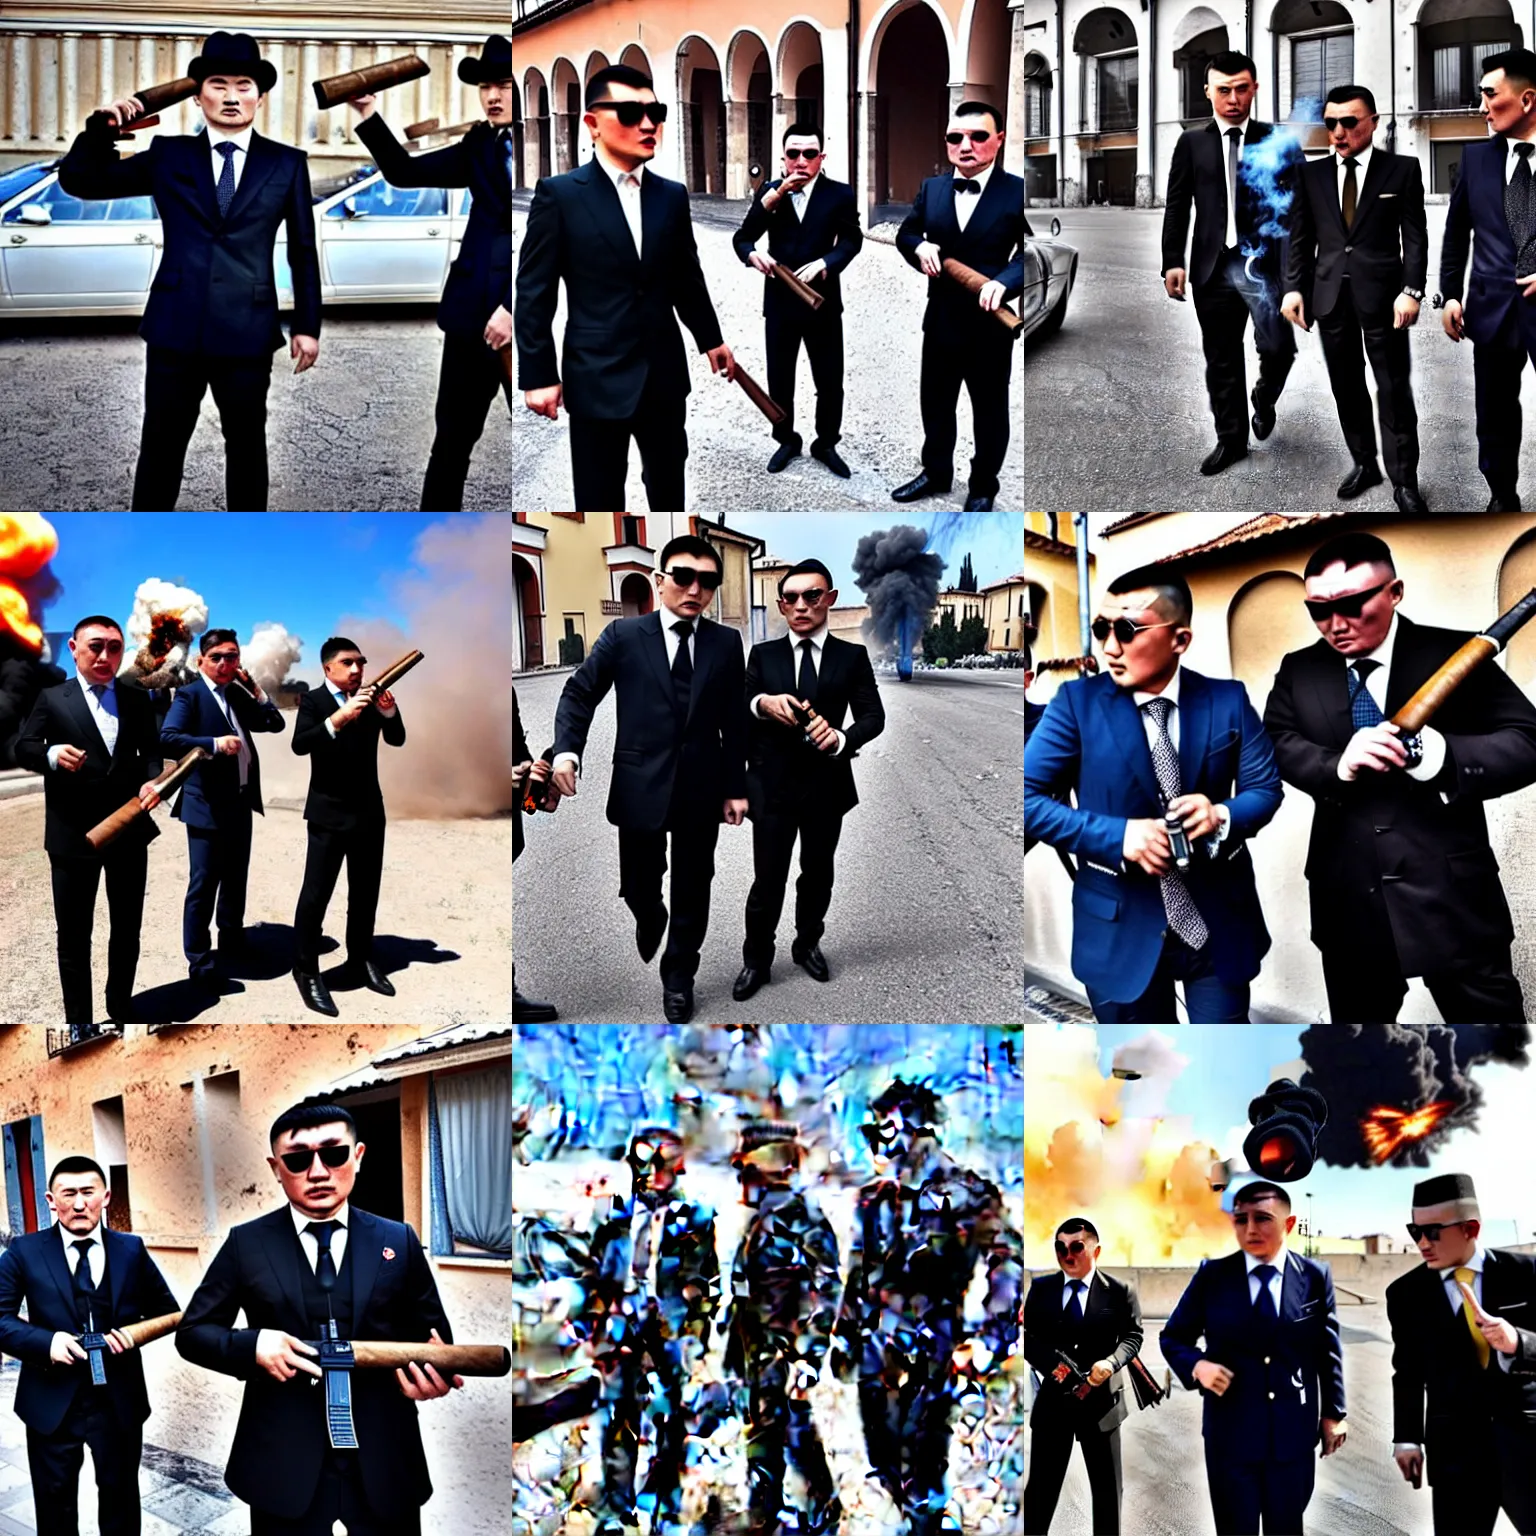 Prompt: Kazakh mafia members in stylish Italian suits with Tommy guns, smoking cigars, explosion in the background